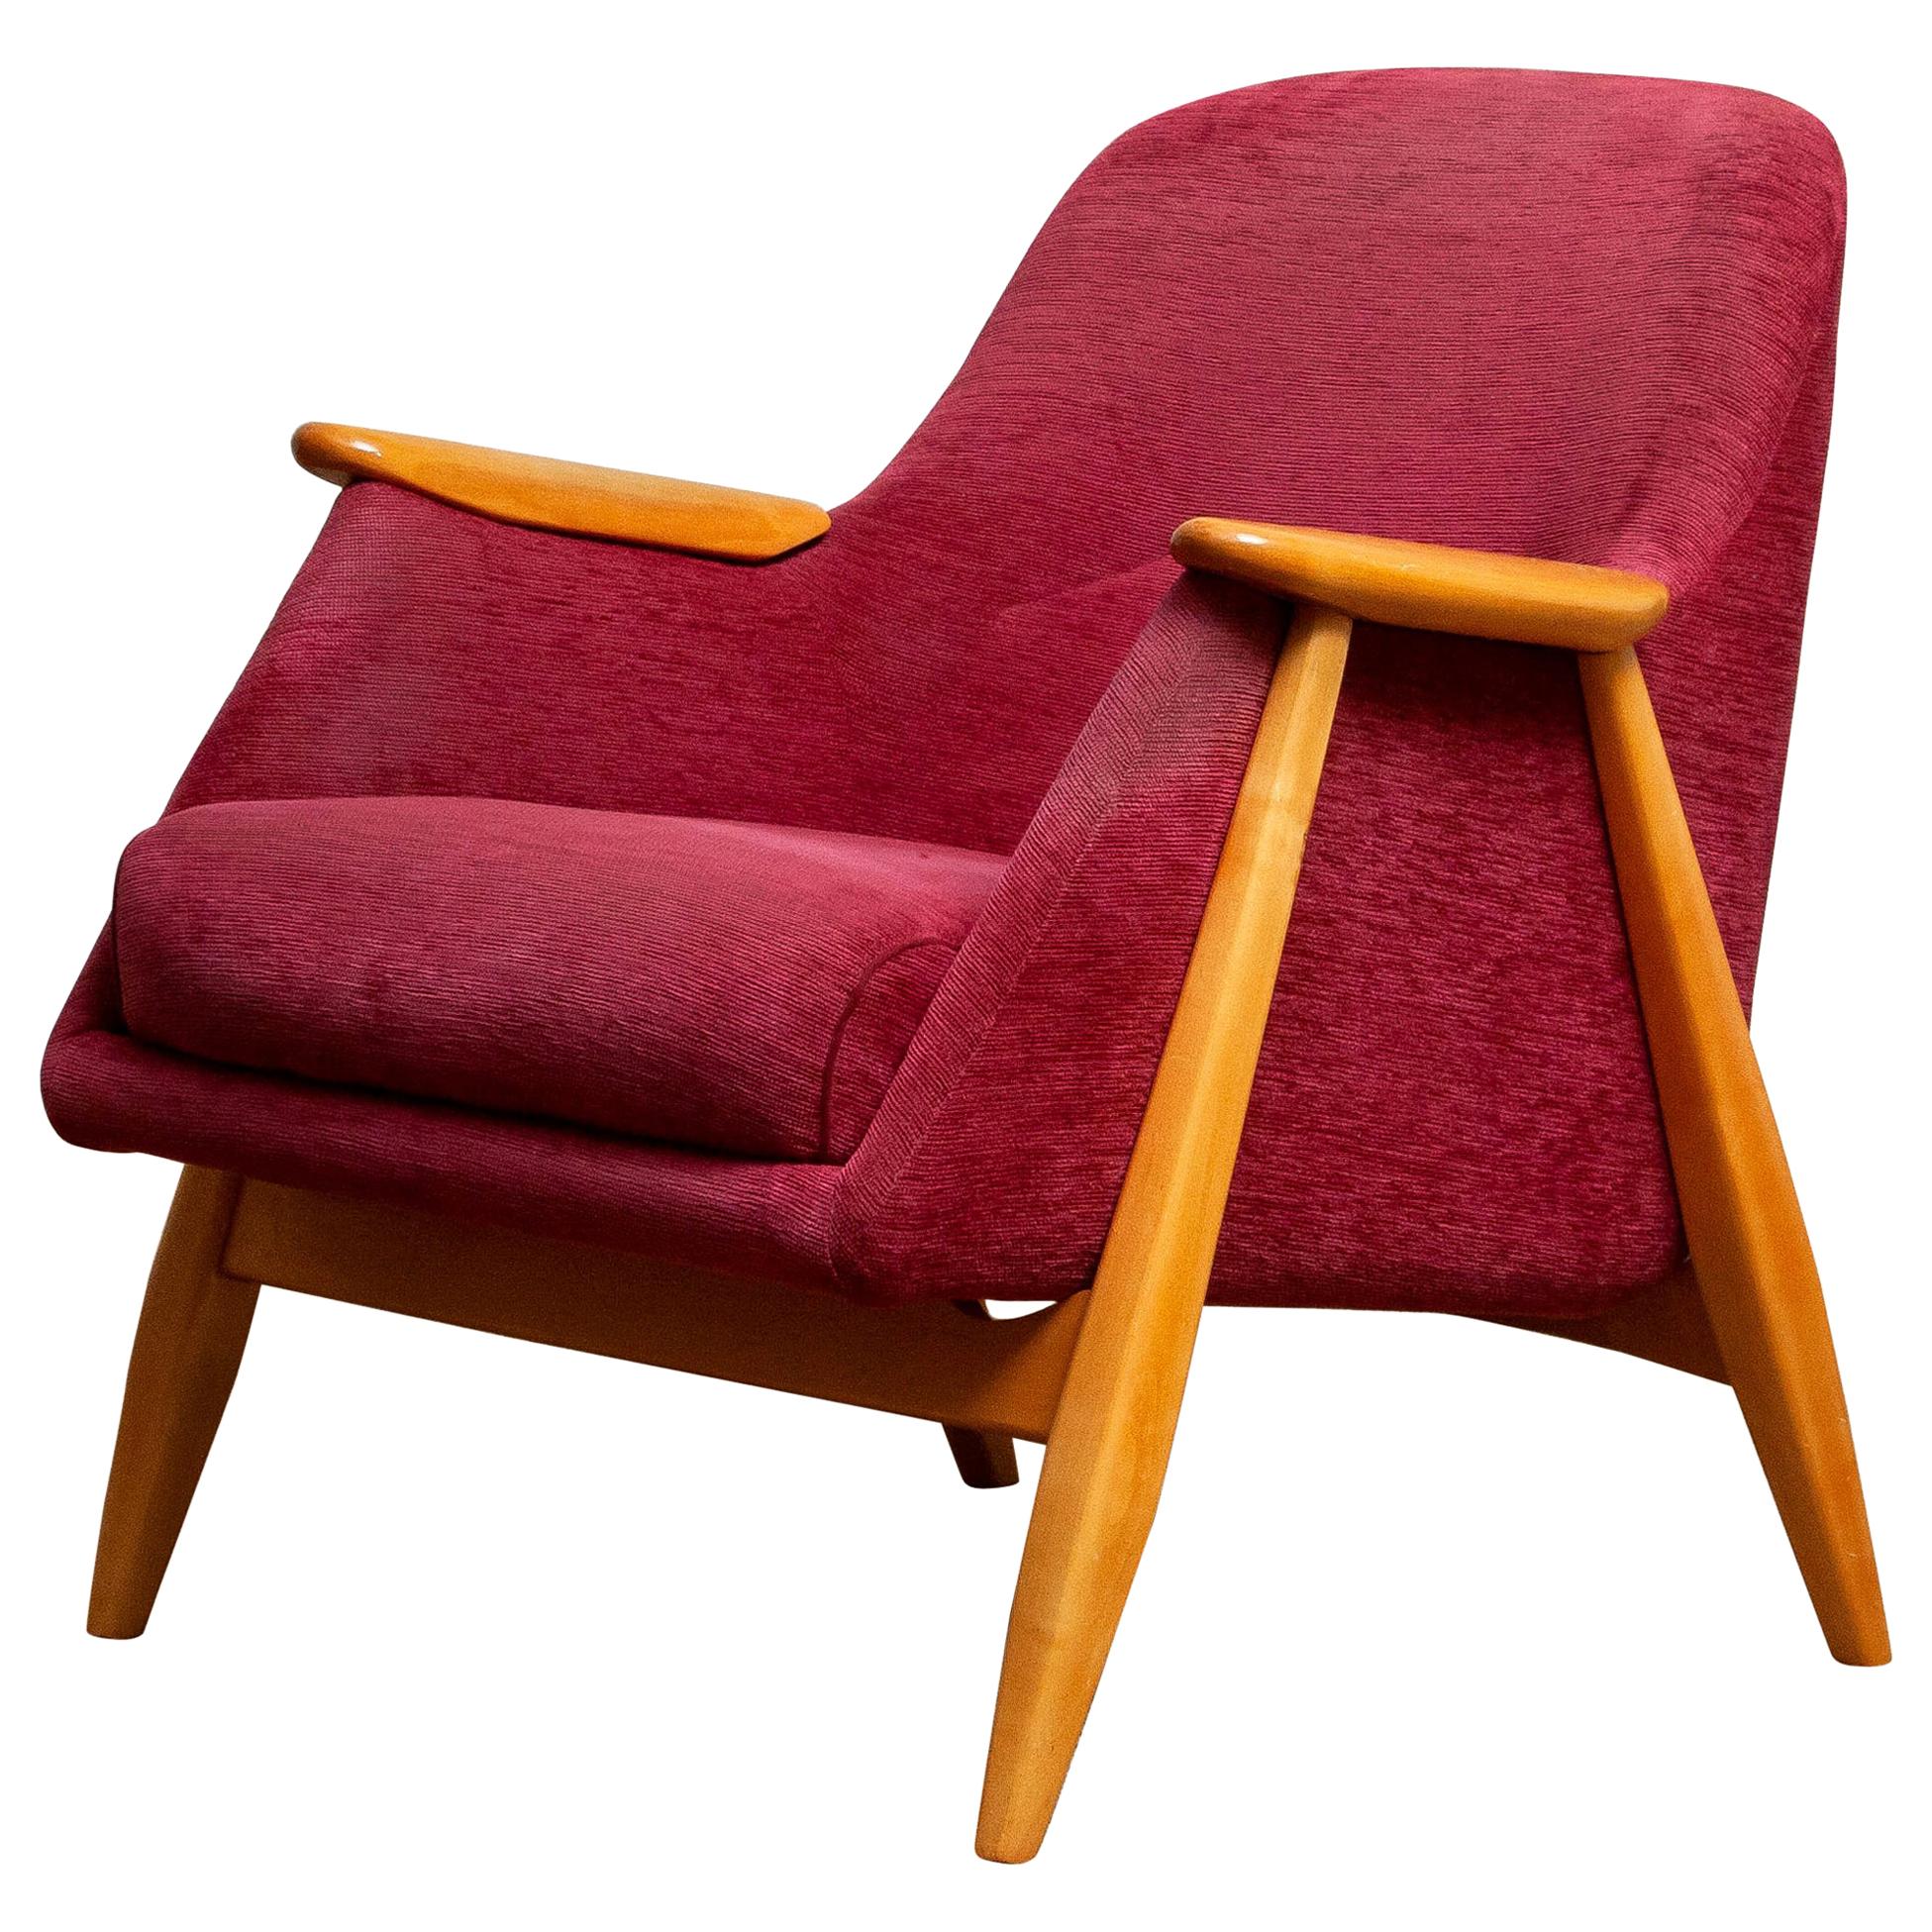 Very nice arm or easy chair designed by Svante Skogh for Asko, Finland.
This chair is made of beech and original dark pink chenille/baby-roy fabric.
It is in a good condition.
Period: 1950s
Dimensions: H 75 cm, W 70 cm, D 66 cm.